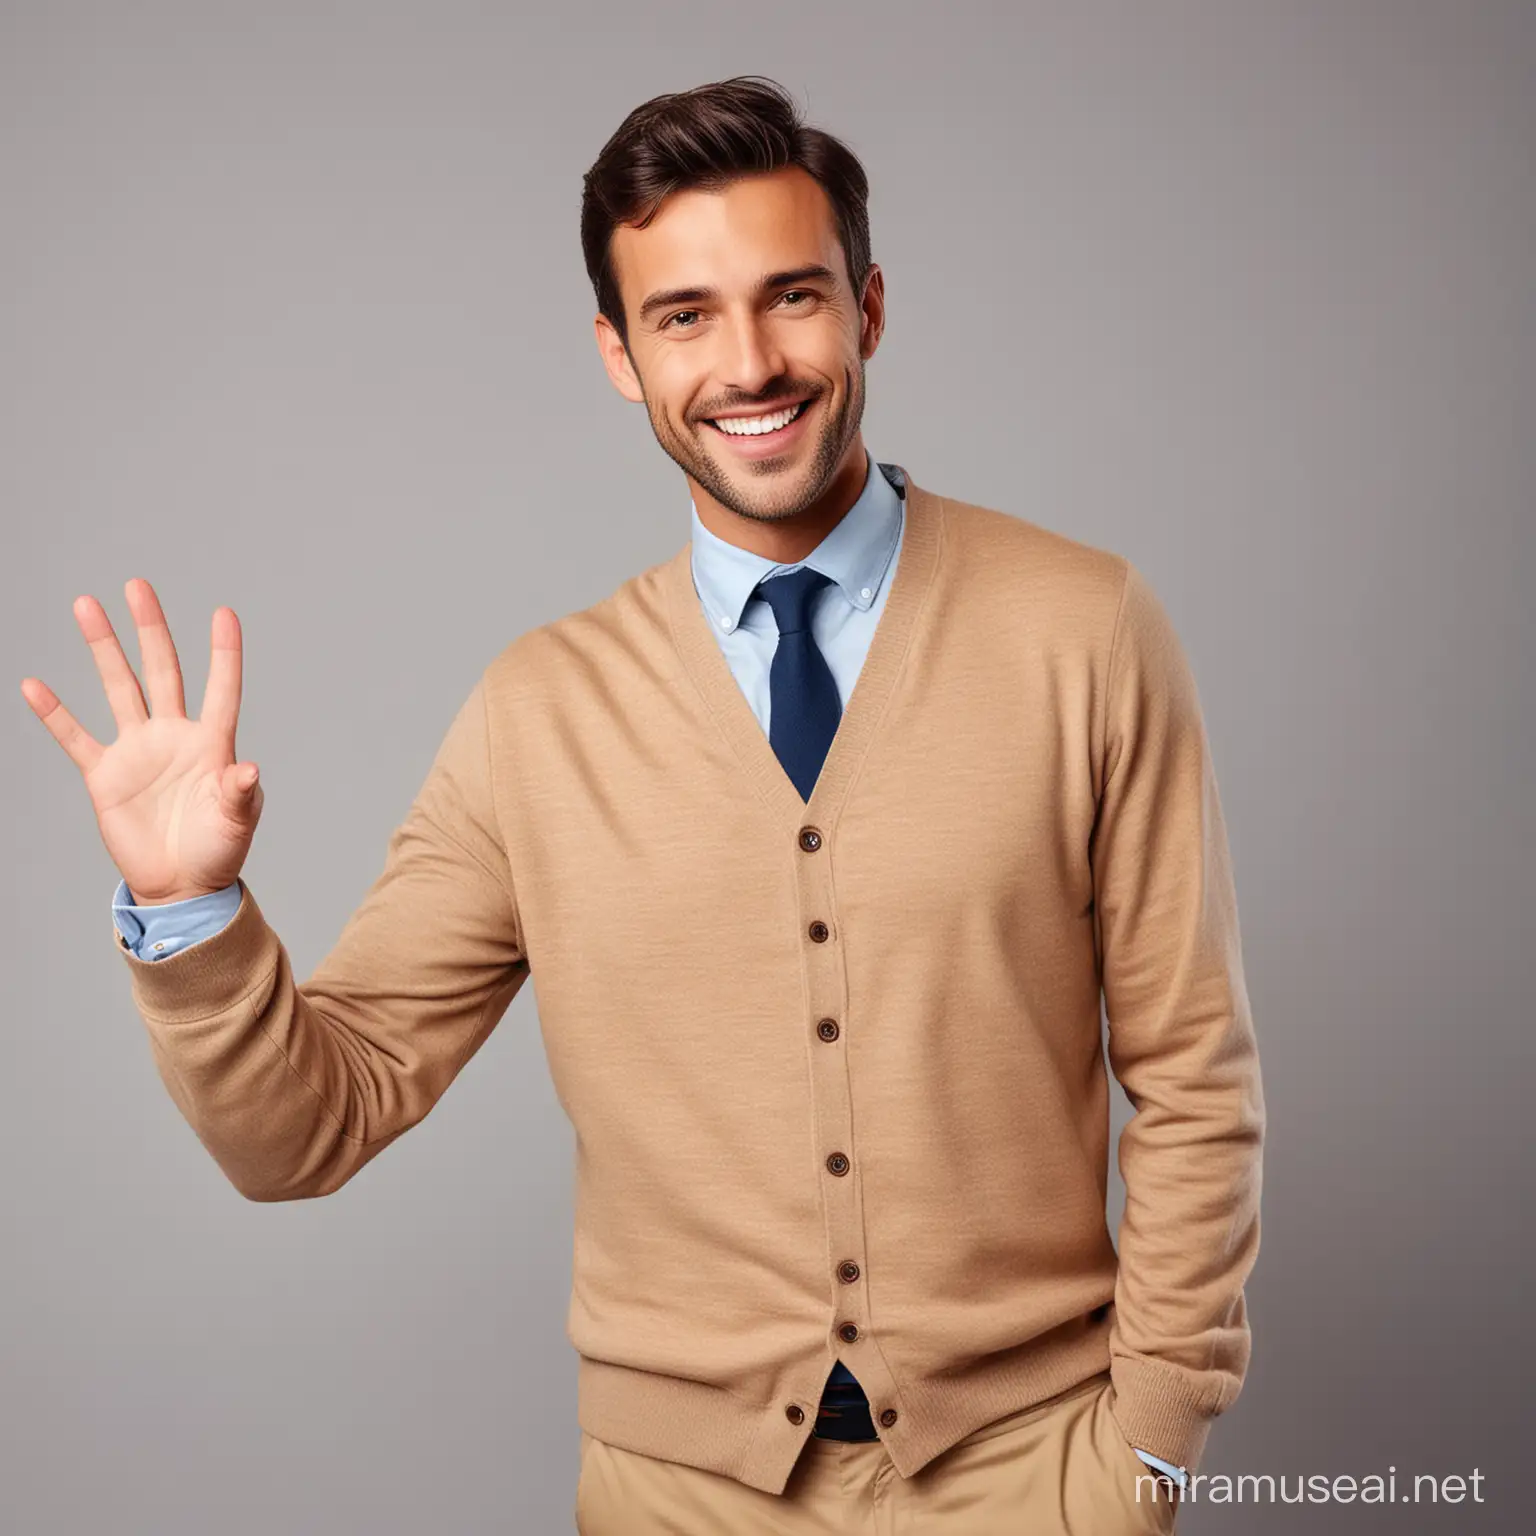 Smiling Male Teacher in Immaculate Attire Greeting Someone with Dignity